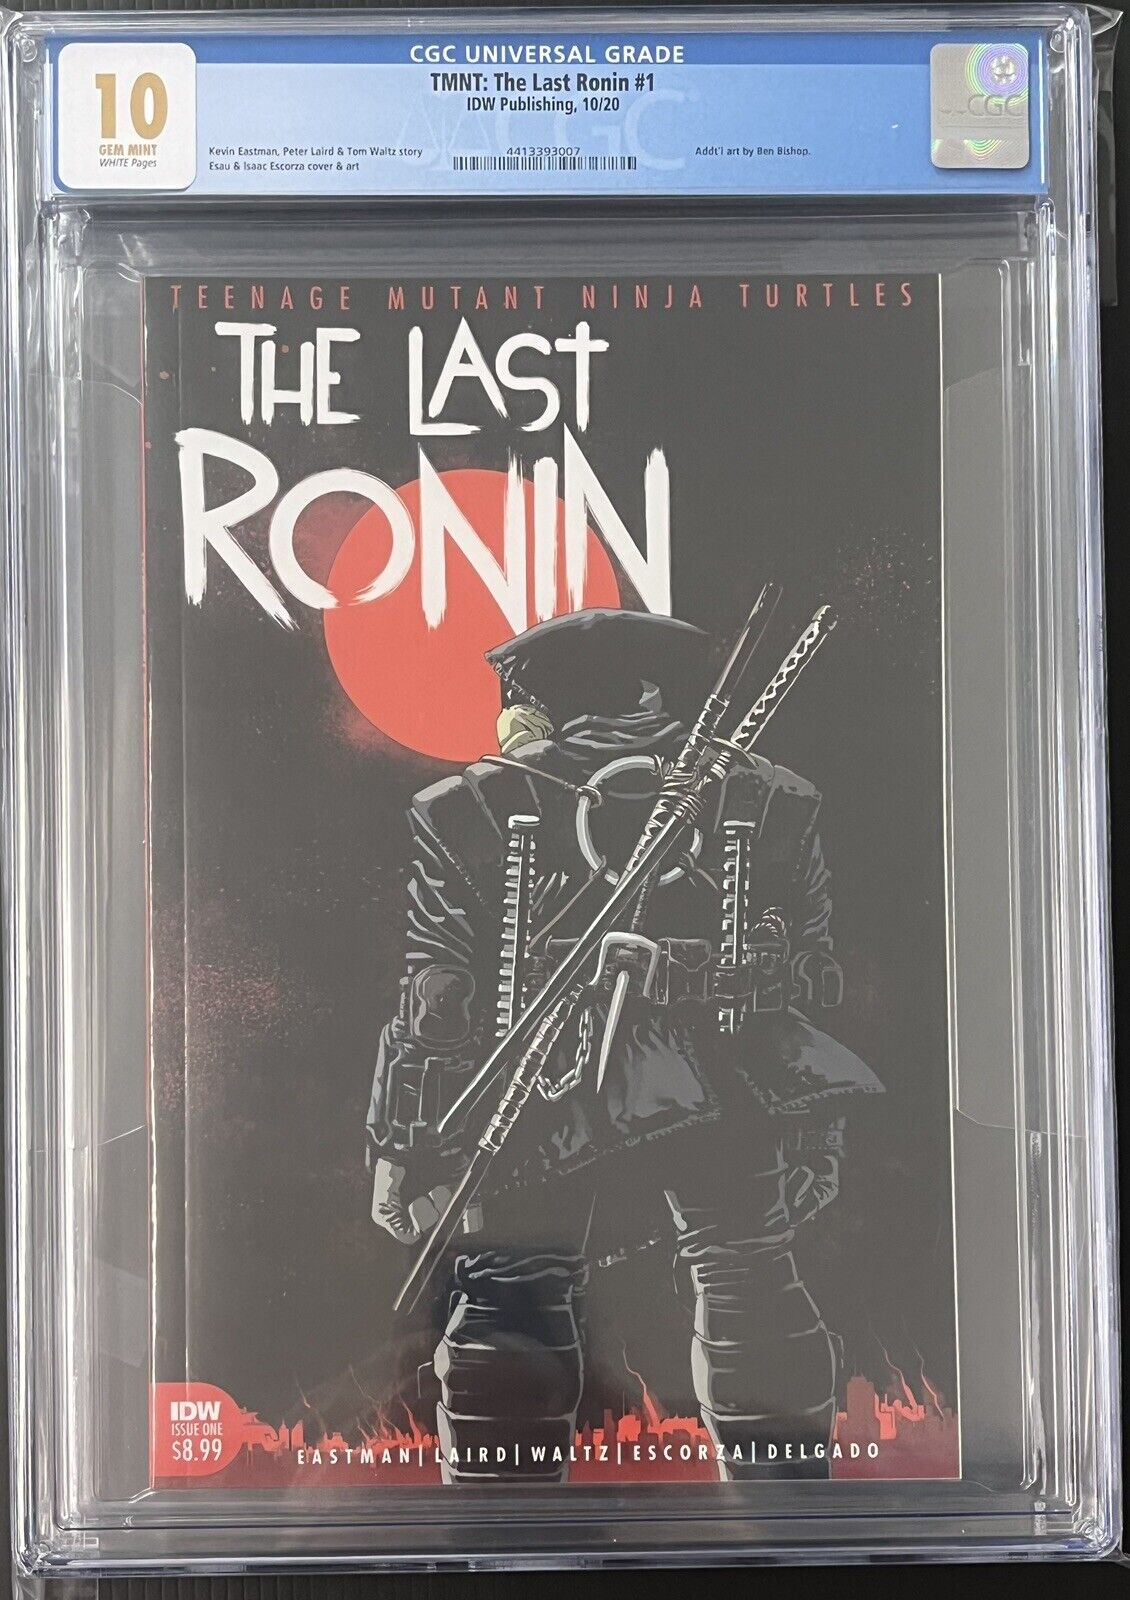 TMNT THE LAST RONIN #1 1ST PRINT GRADED CGC 10 (ONLY 20 ON CENSUS) PROSHIPPER